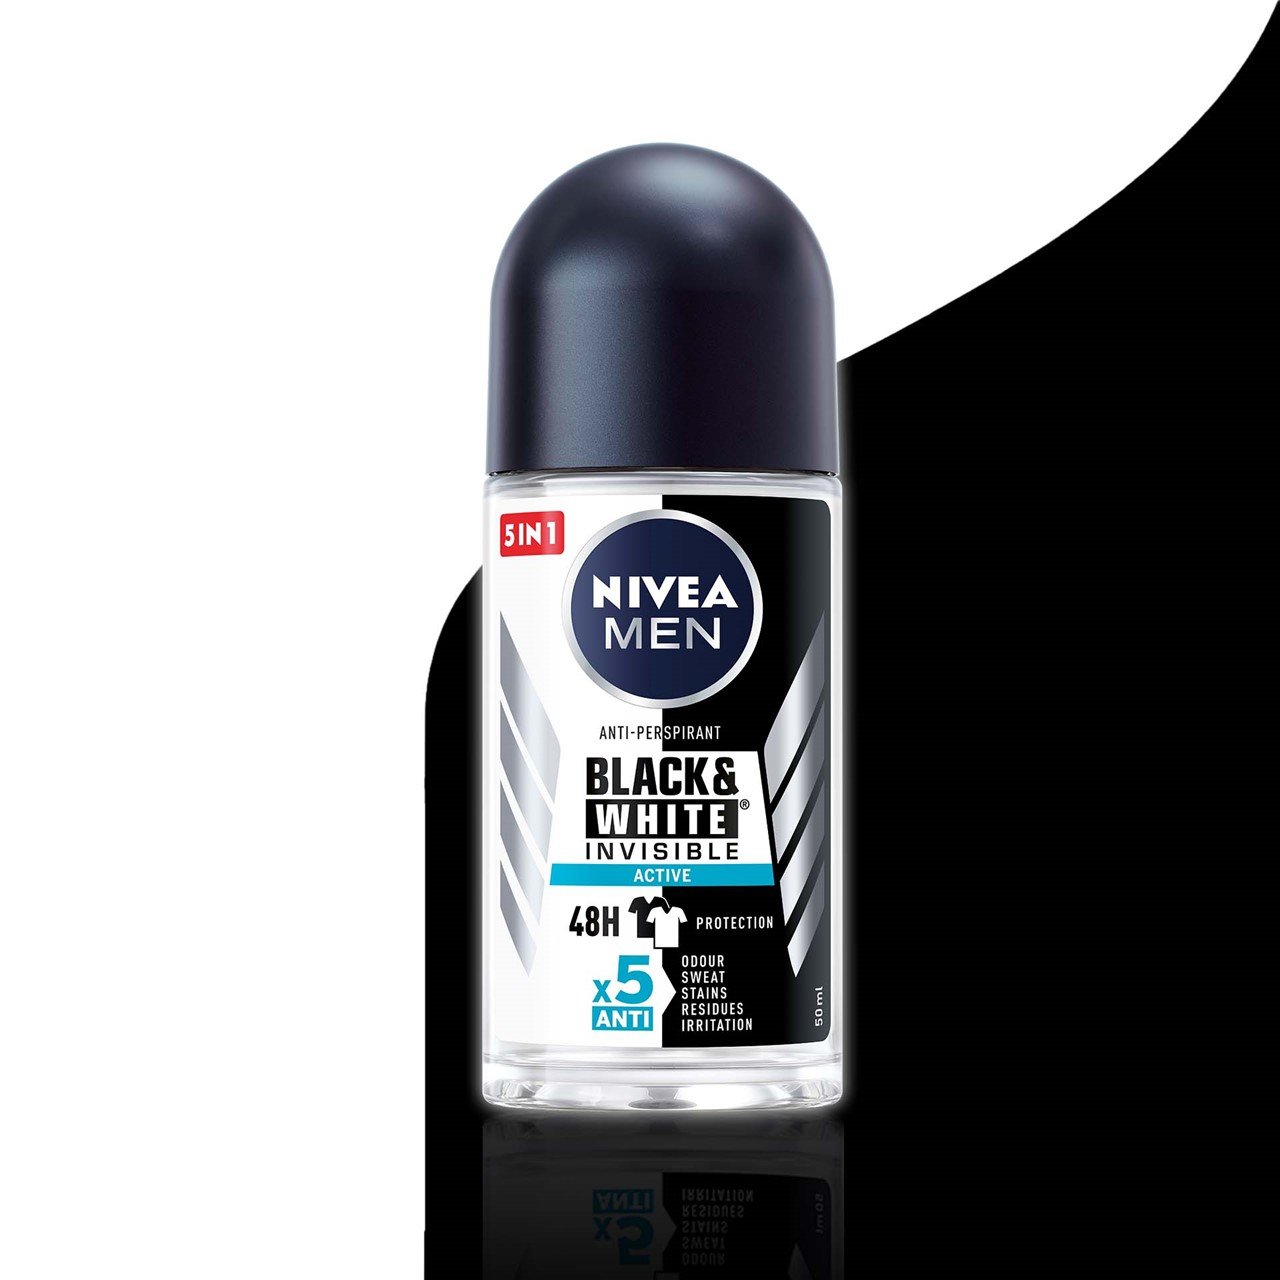 Buy Nivea Black & White Invisible Silky Smooth Roll-On 50ml · Egypt